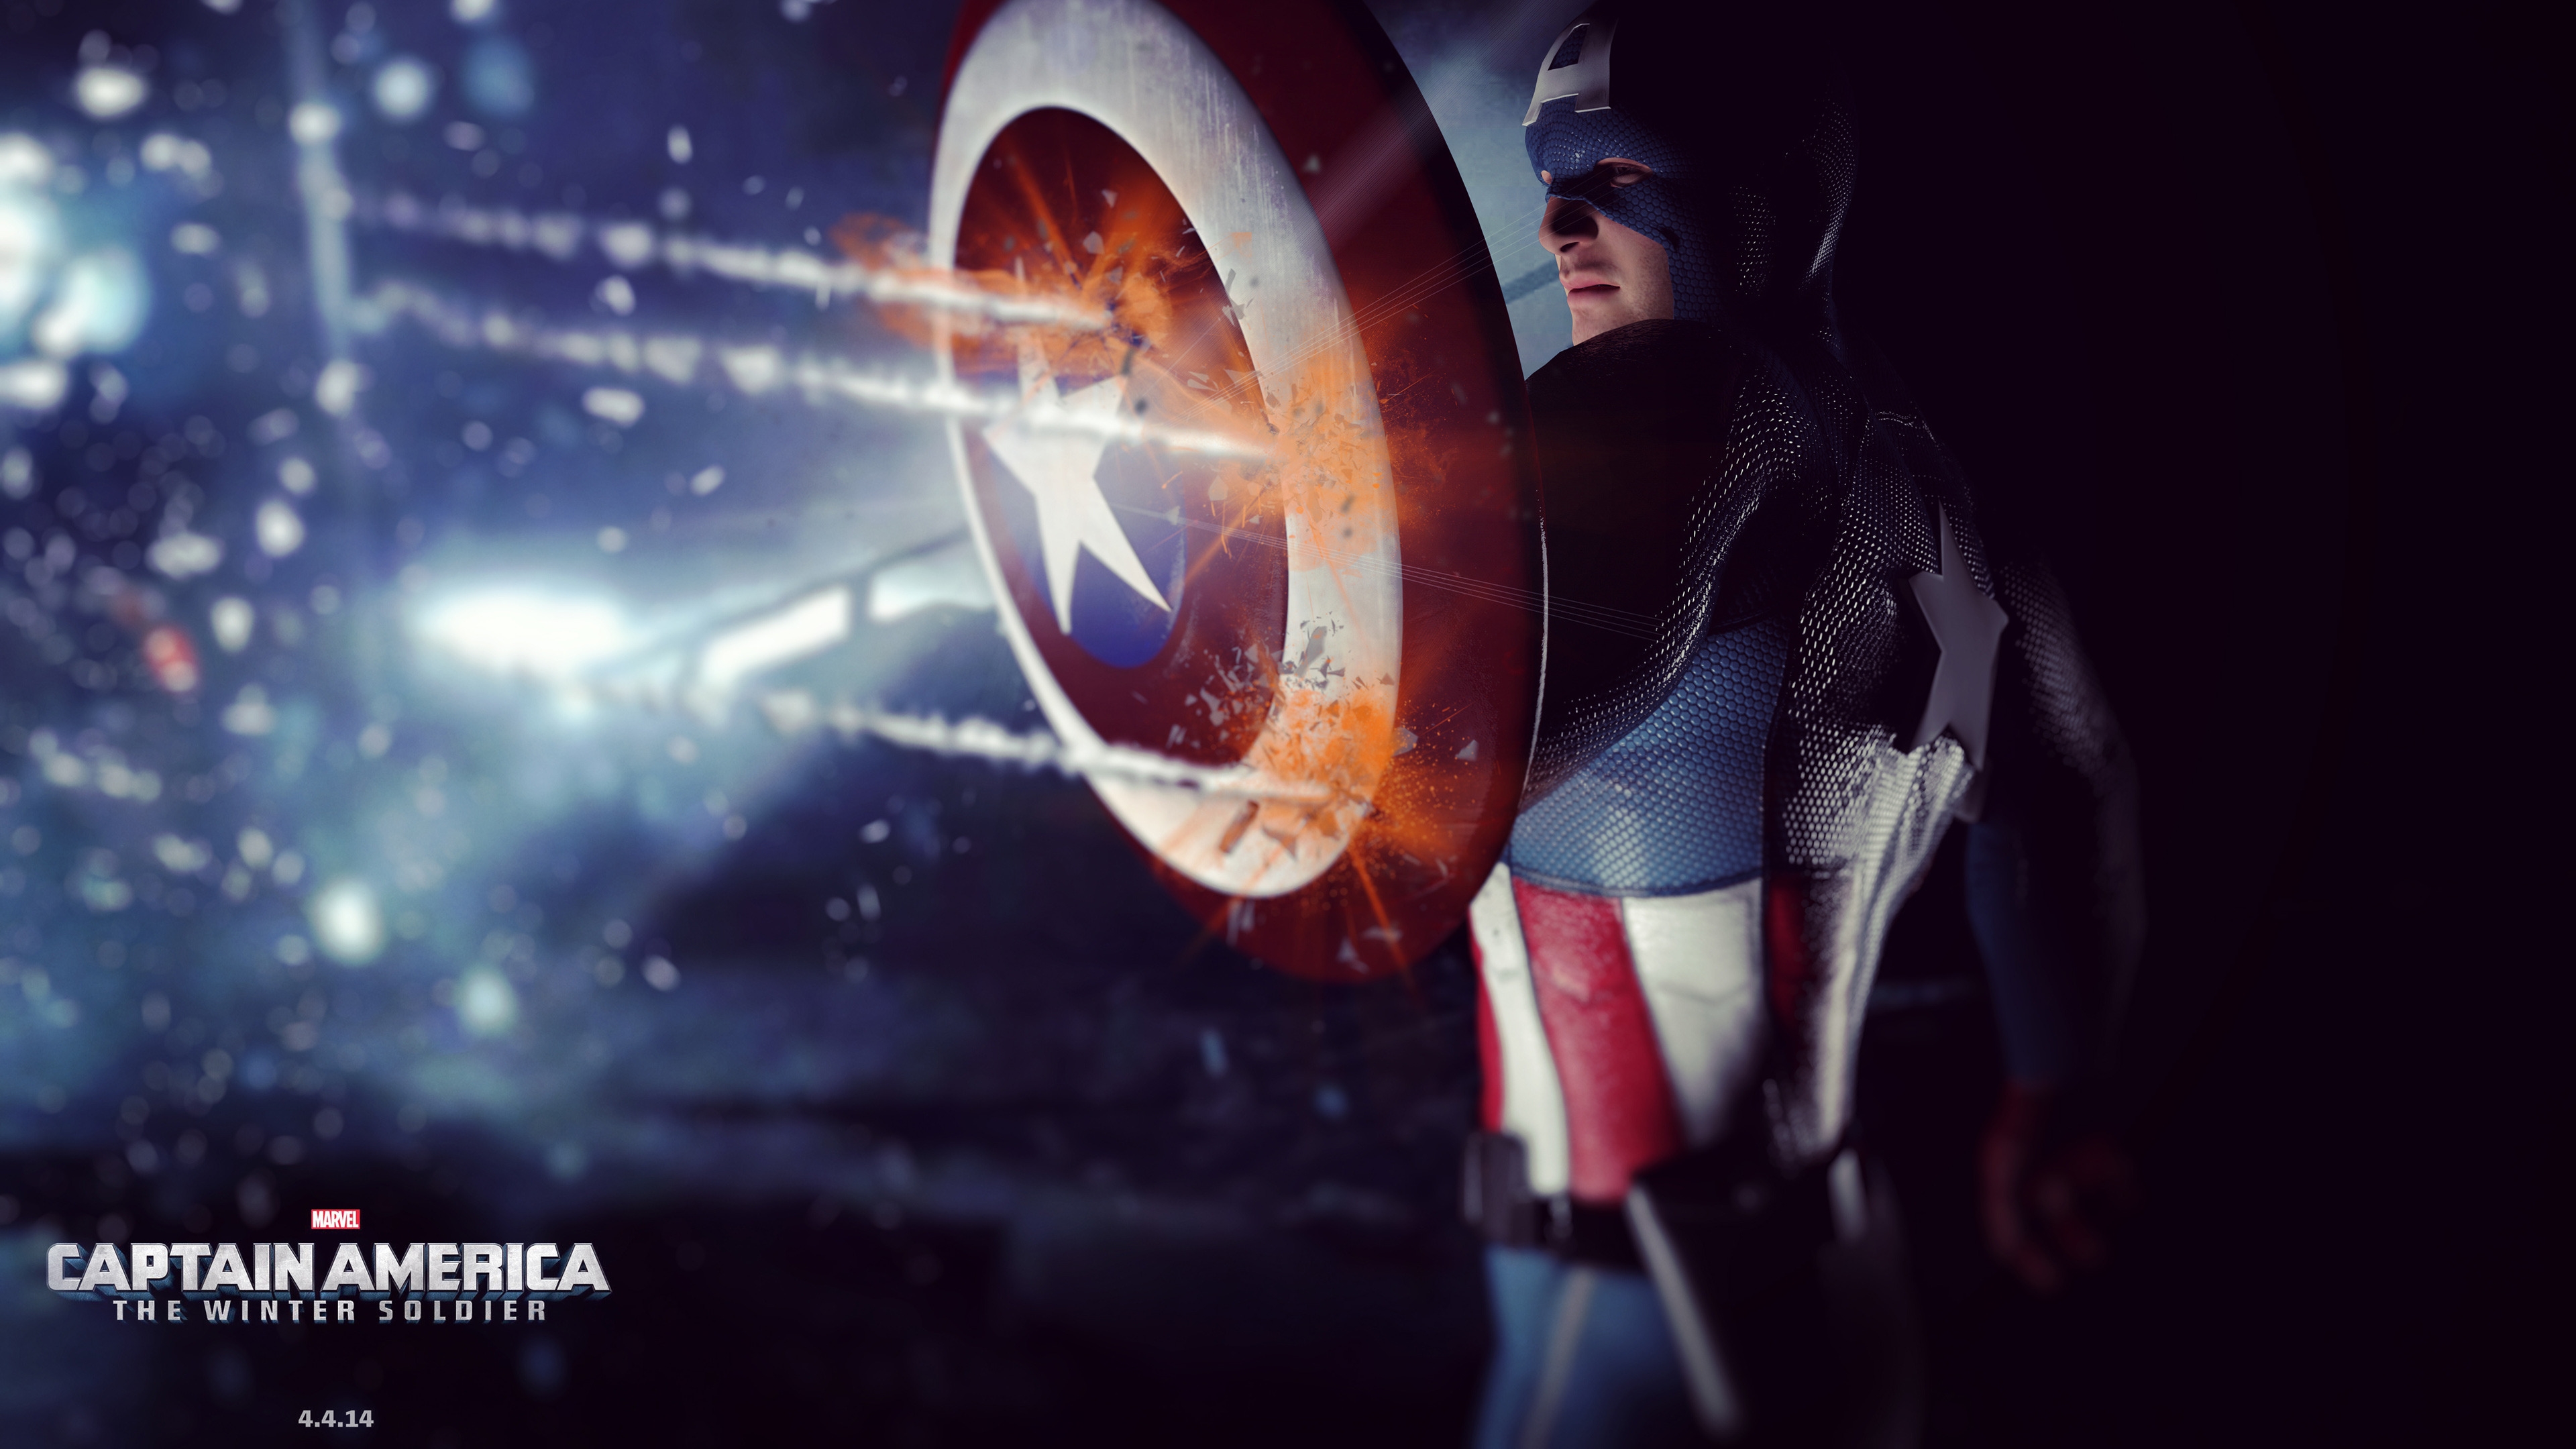 Captain America 2014 for 3840 x 2160 Ultra HD resolution